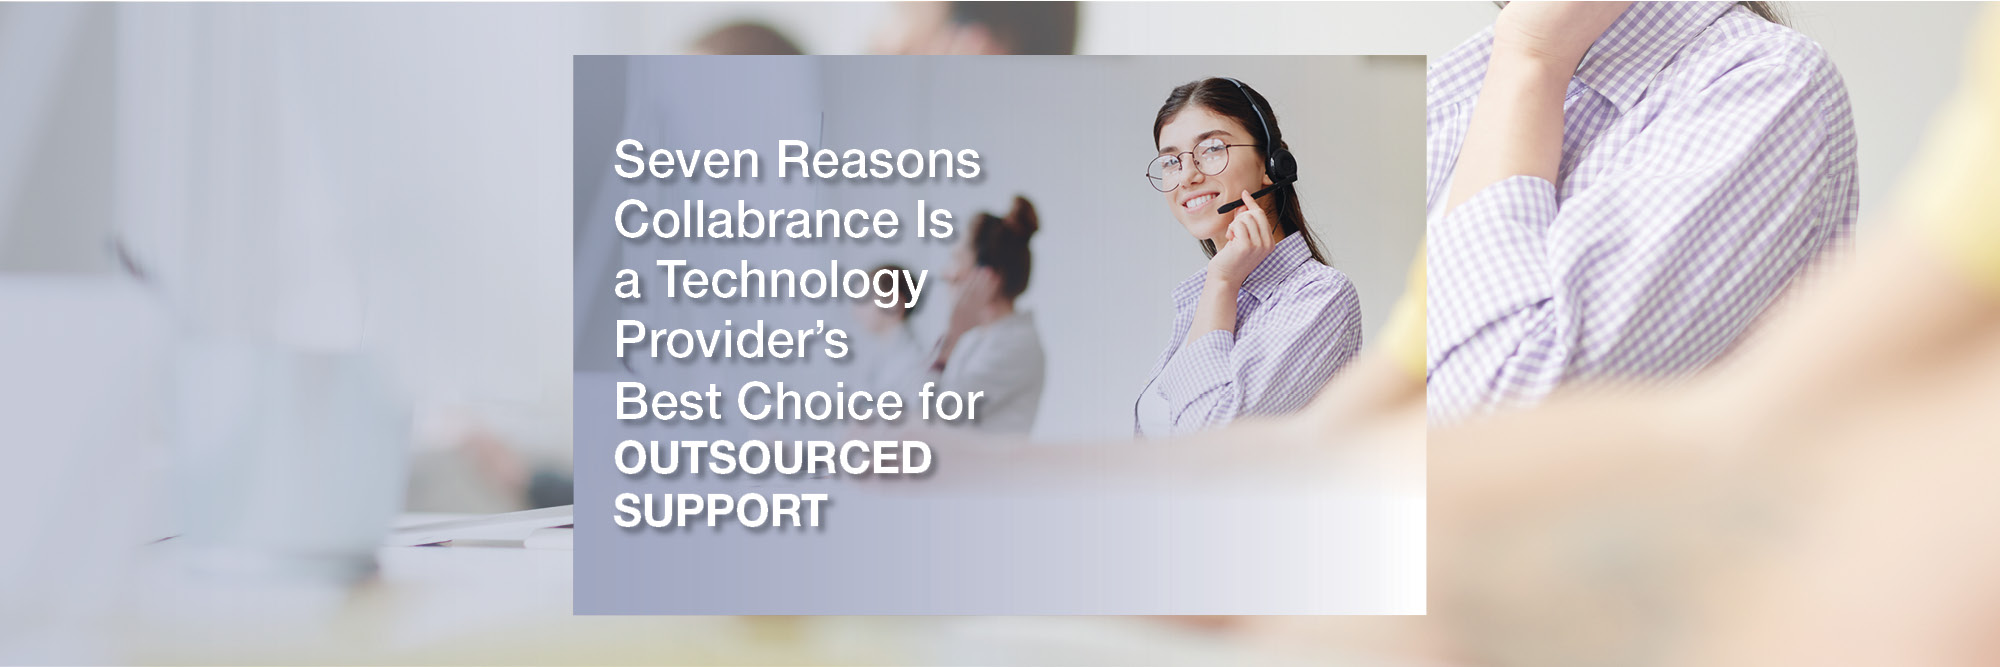 Seven Reasons Collabrance Is a Technology Provider's Best Choice for Outsourced Support